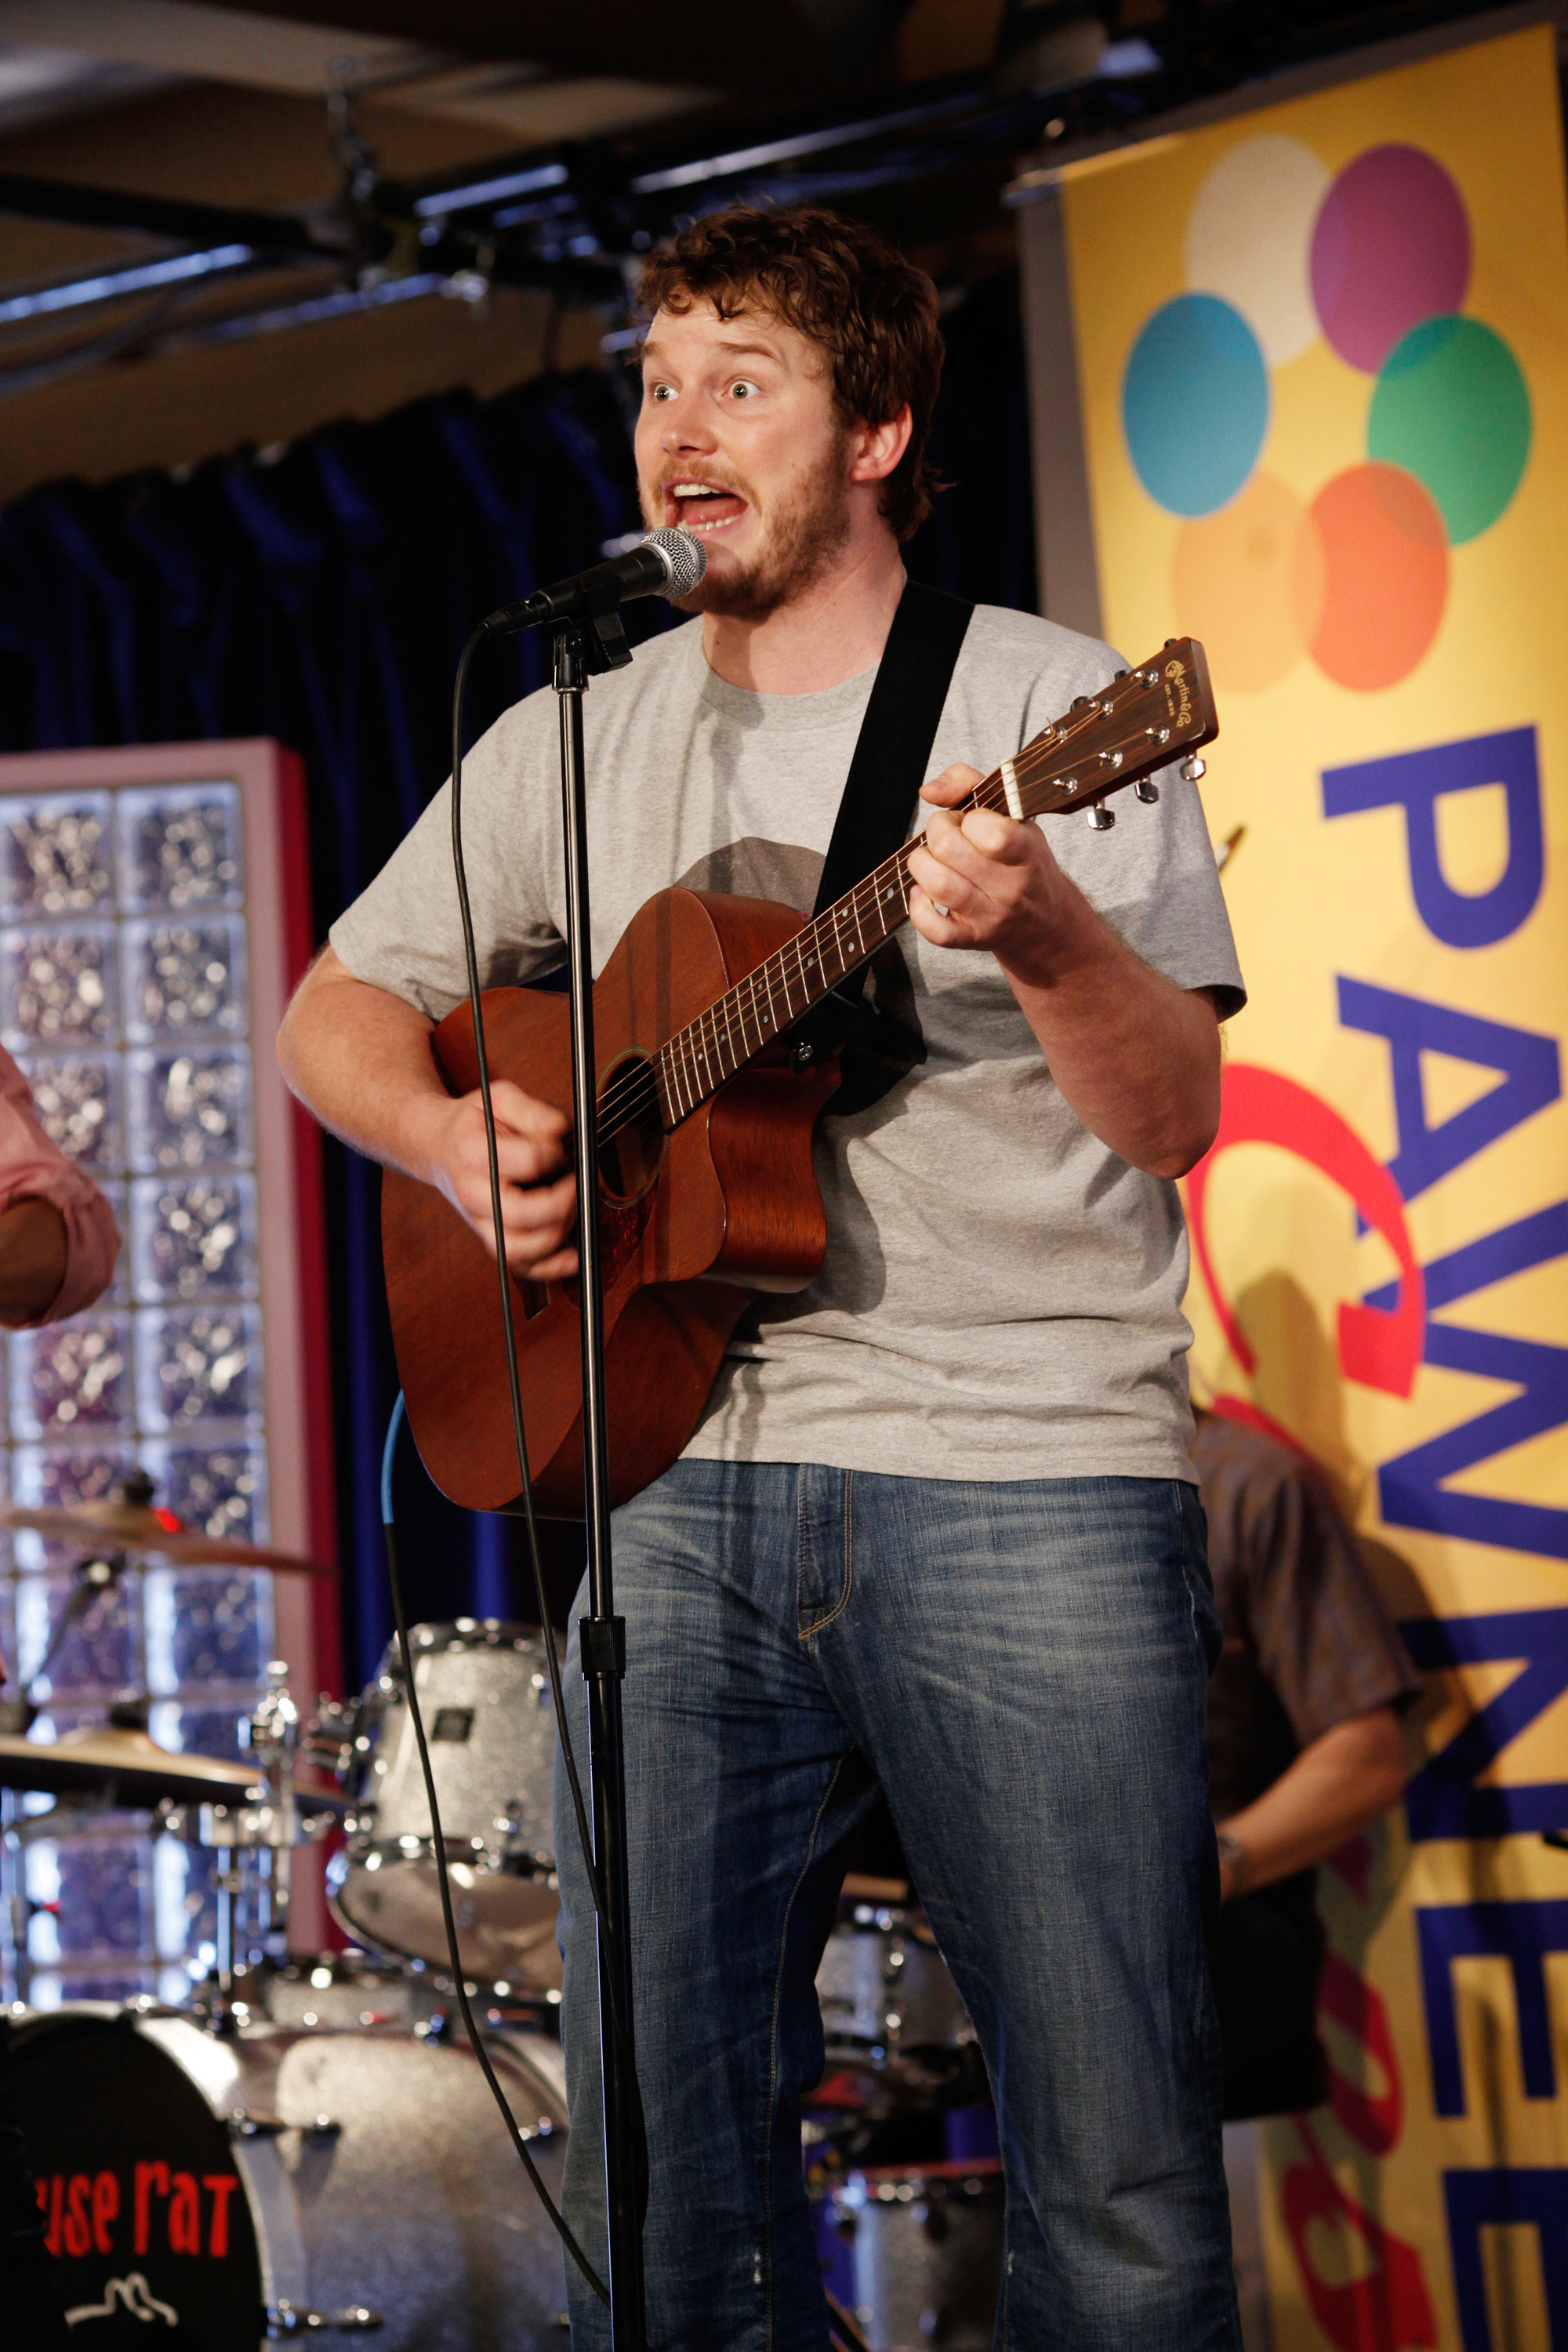 chris playing a guitar and singing in parks and rec